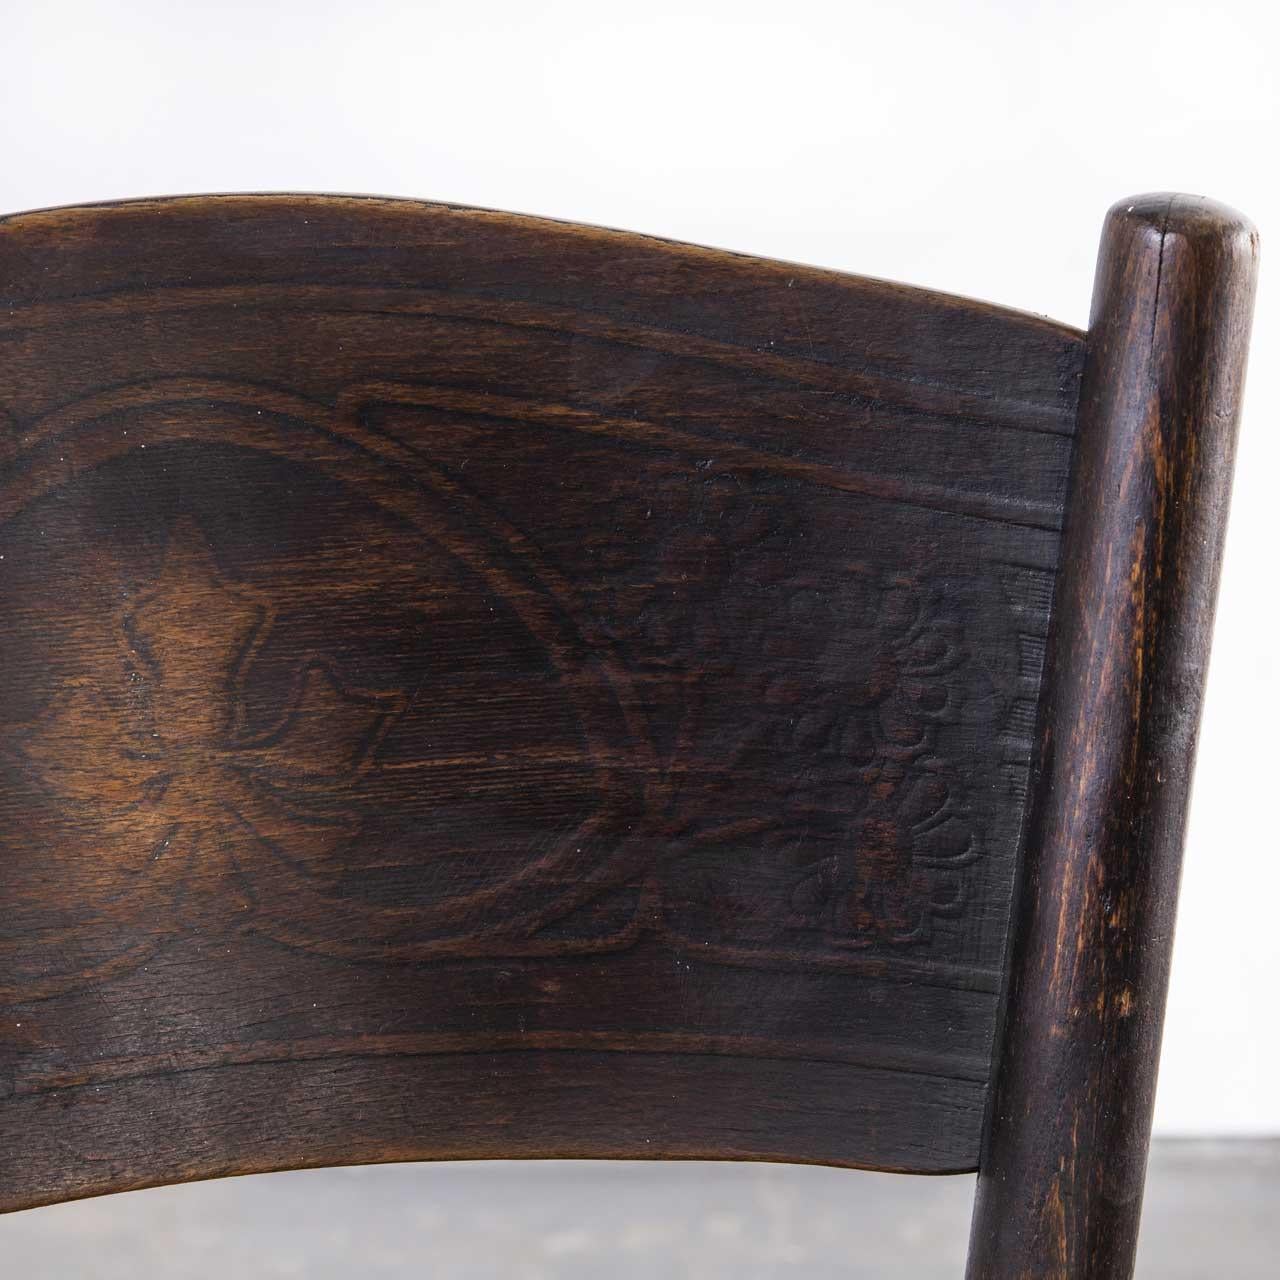 1930’s Harlequin set of original bentwood dining chairs – set of seven
1930’s Harlequin set of original bentwood dining chairs – set of seven. Founded in the early 19th Century by Michael Thonet, Thonet invented the process of steam bending wood